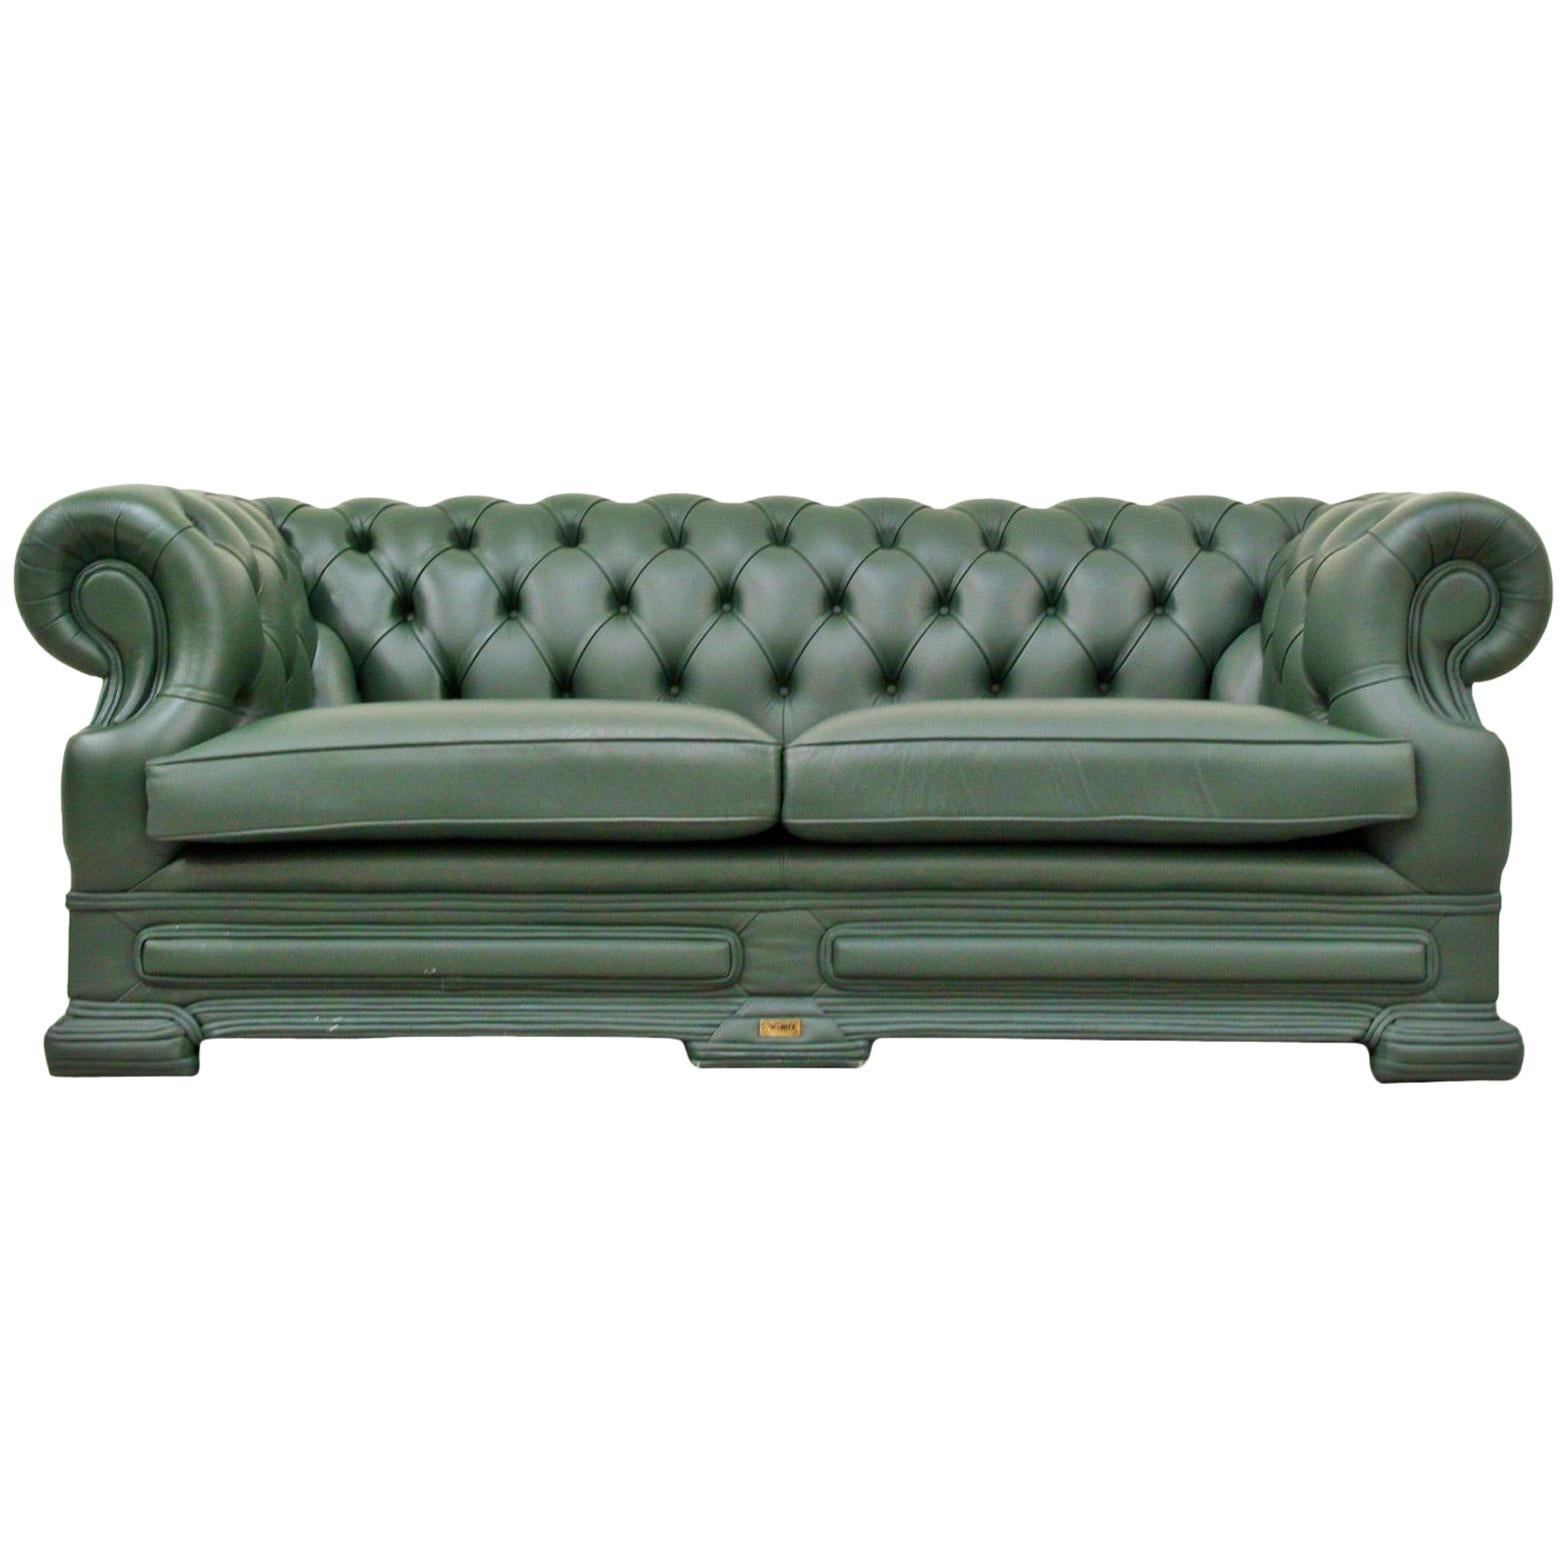 Chesterfield Sofa Leather Antique Vintage Couch English Chippendale Chesterfield For Sale